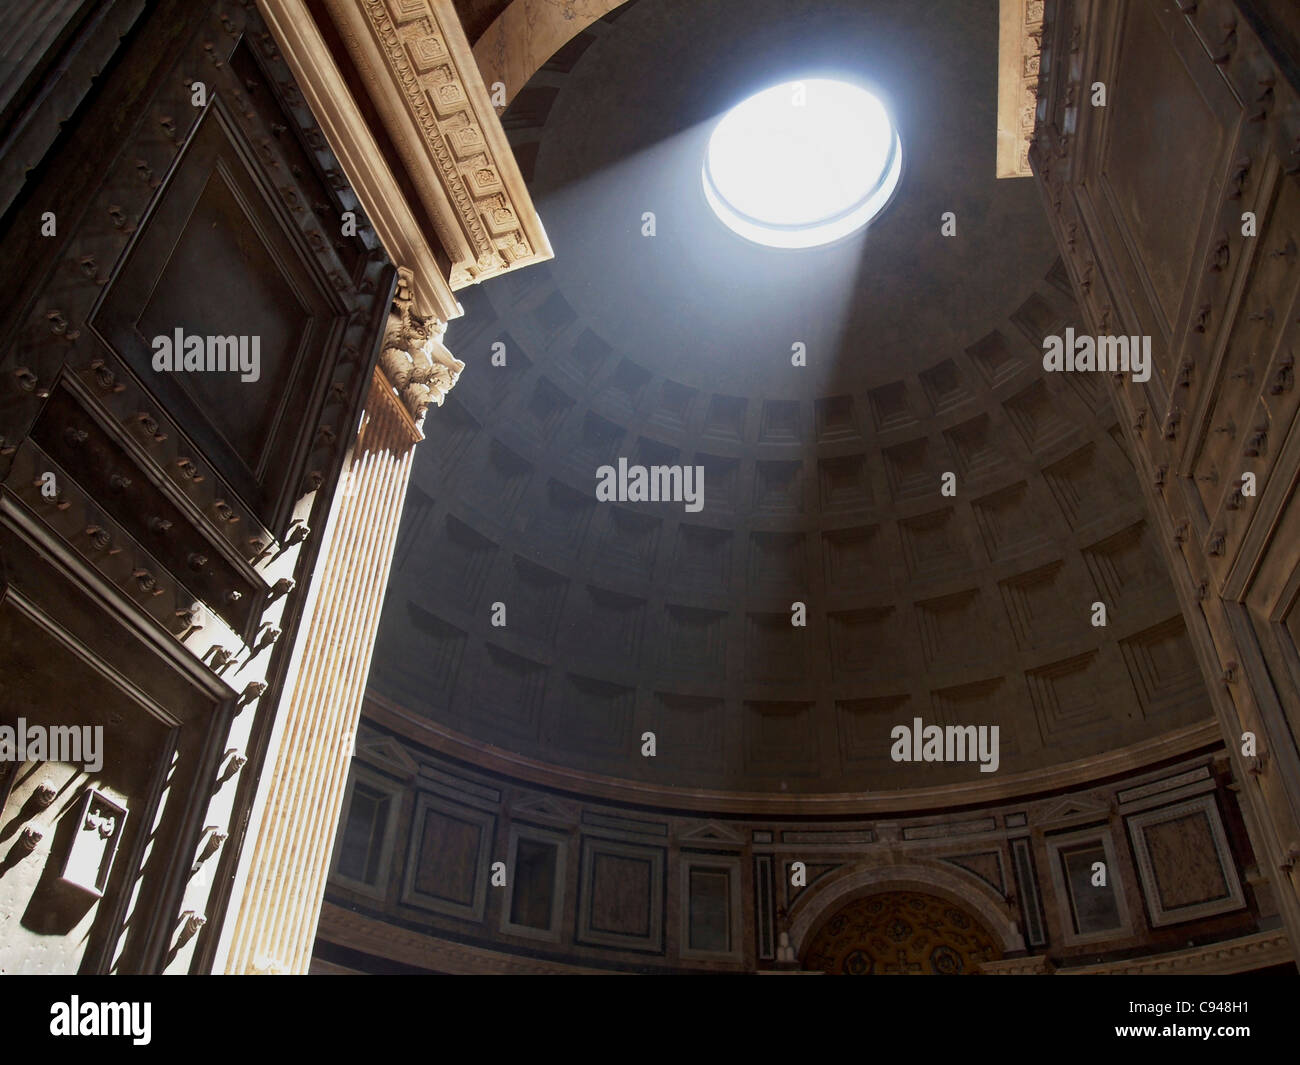 Pantheon, dome, opening, interior view with ray of light, Rome, Italy. Stock Photo